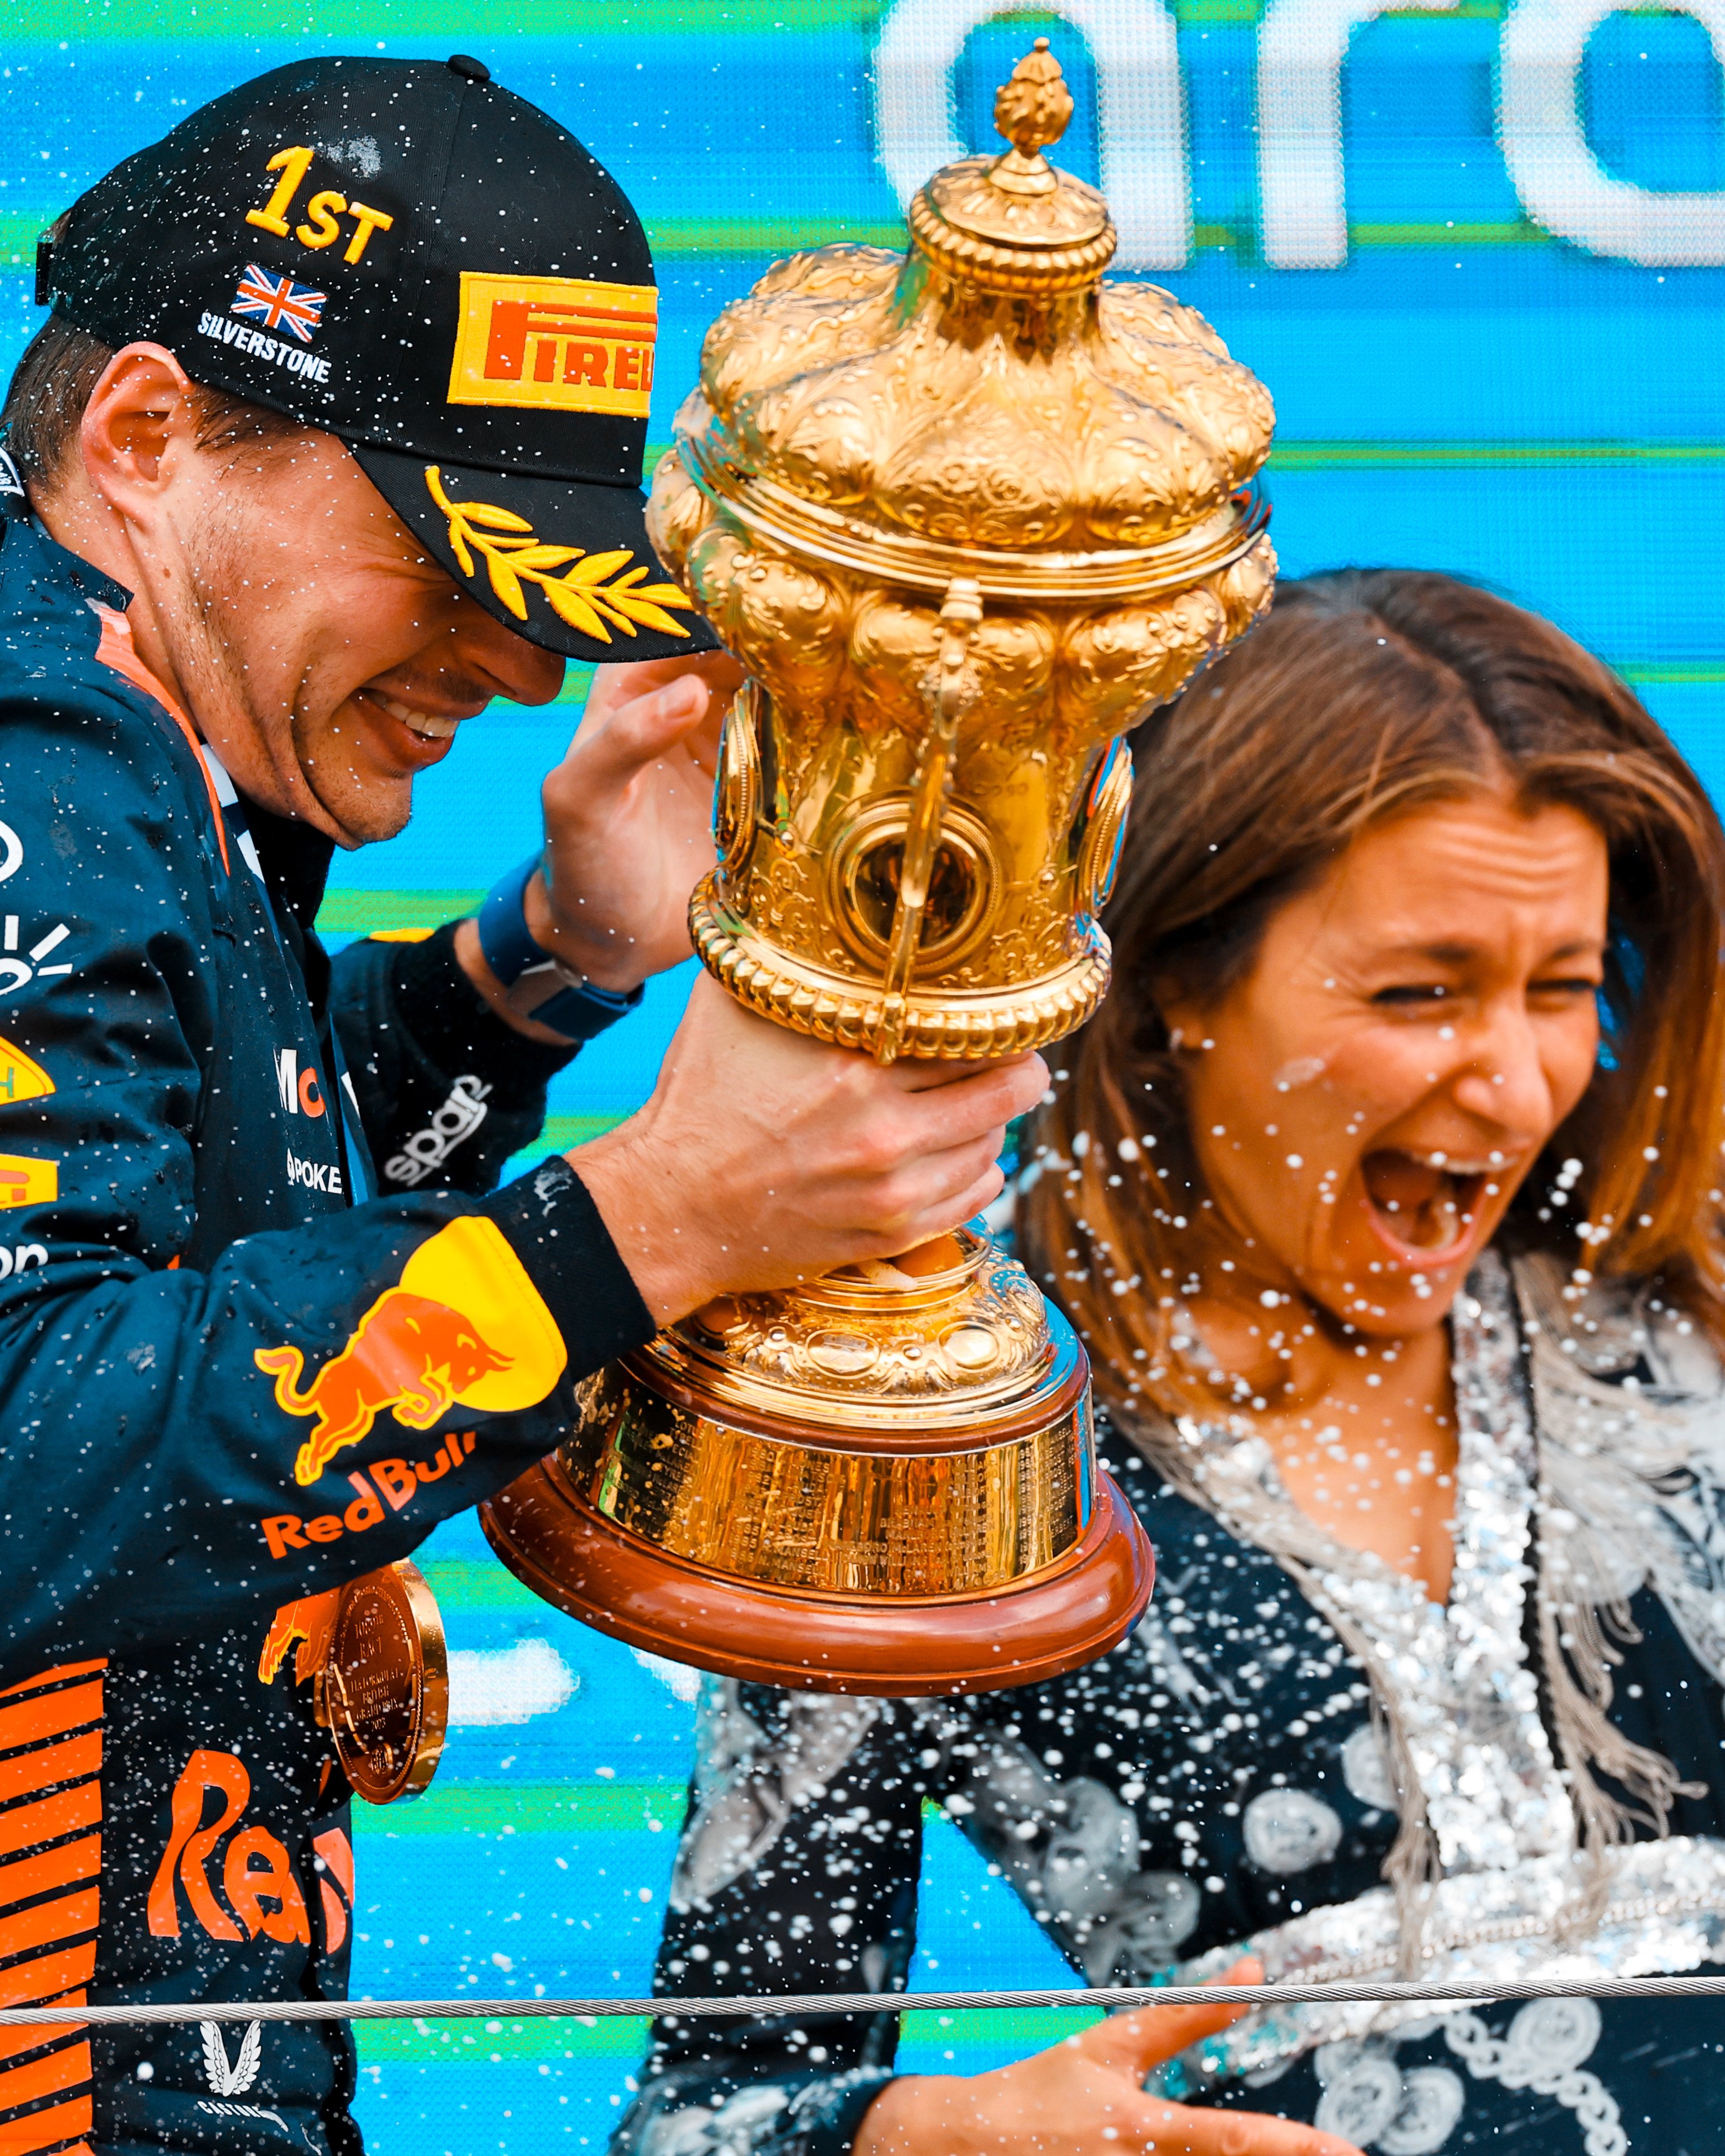 Silverstone on X: 43 Grand Prix wins, two #F1 World Championships and now  @Max33Verstappen has lifted the iconic @RoyalAutomobile Club trophy for the  very first time. What a roll the Dutchman is